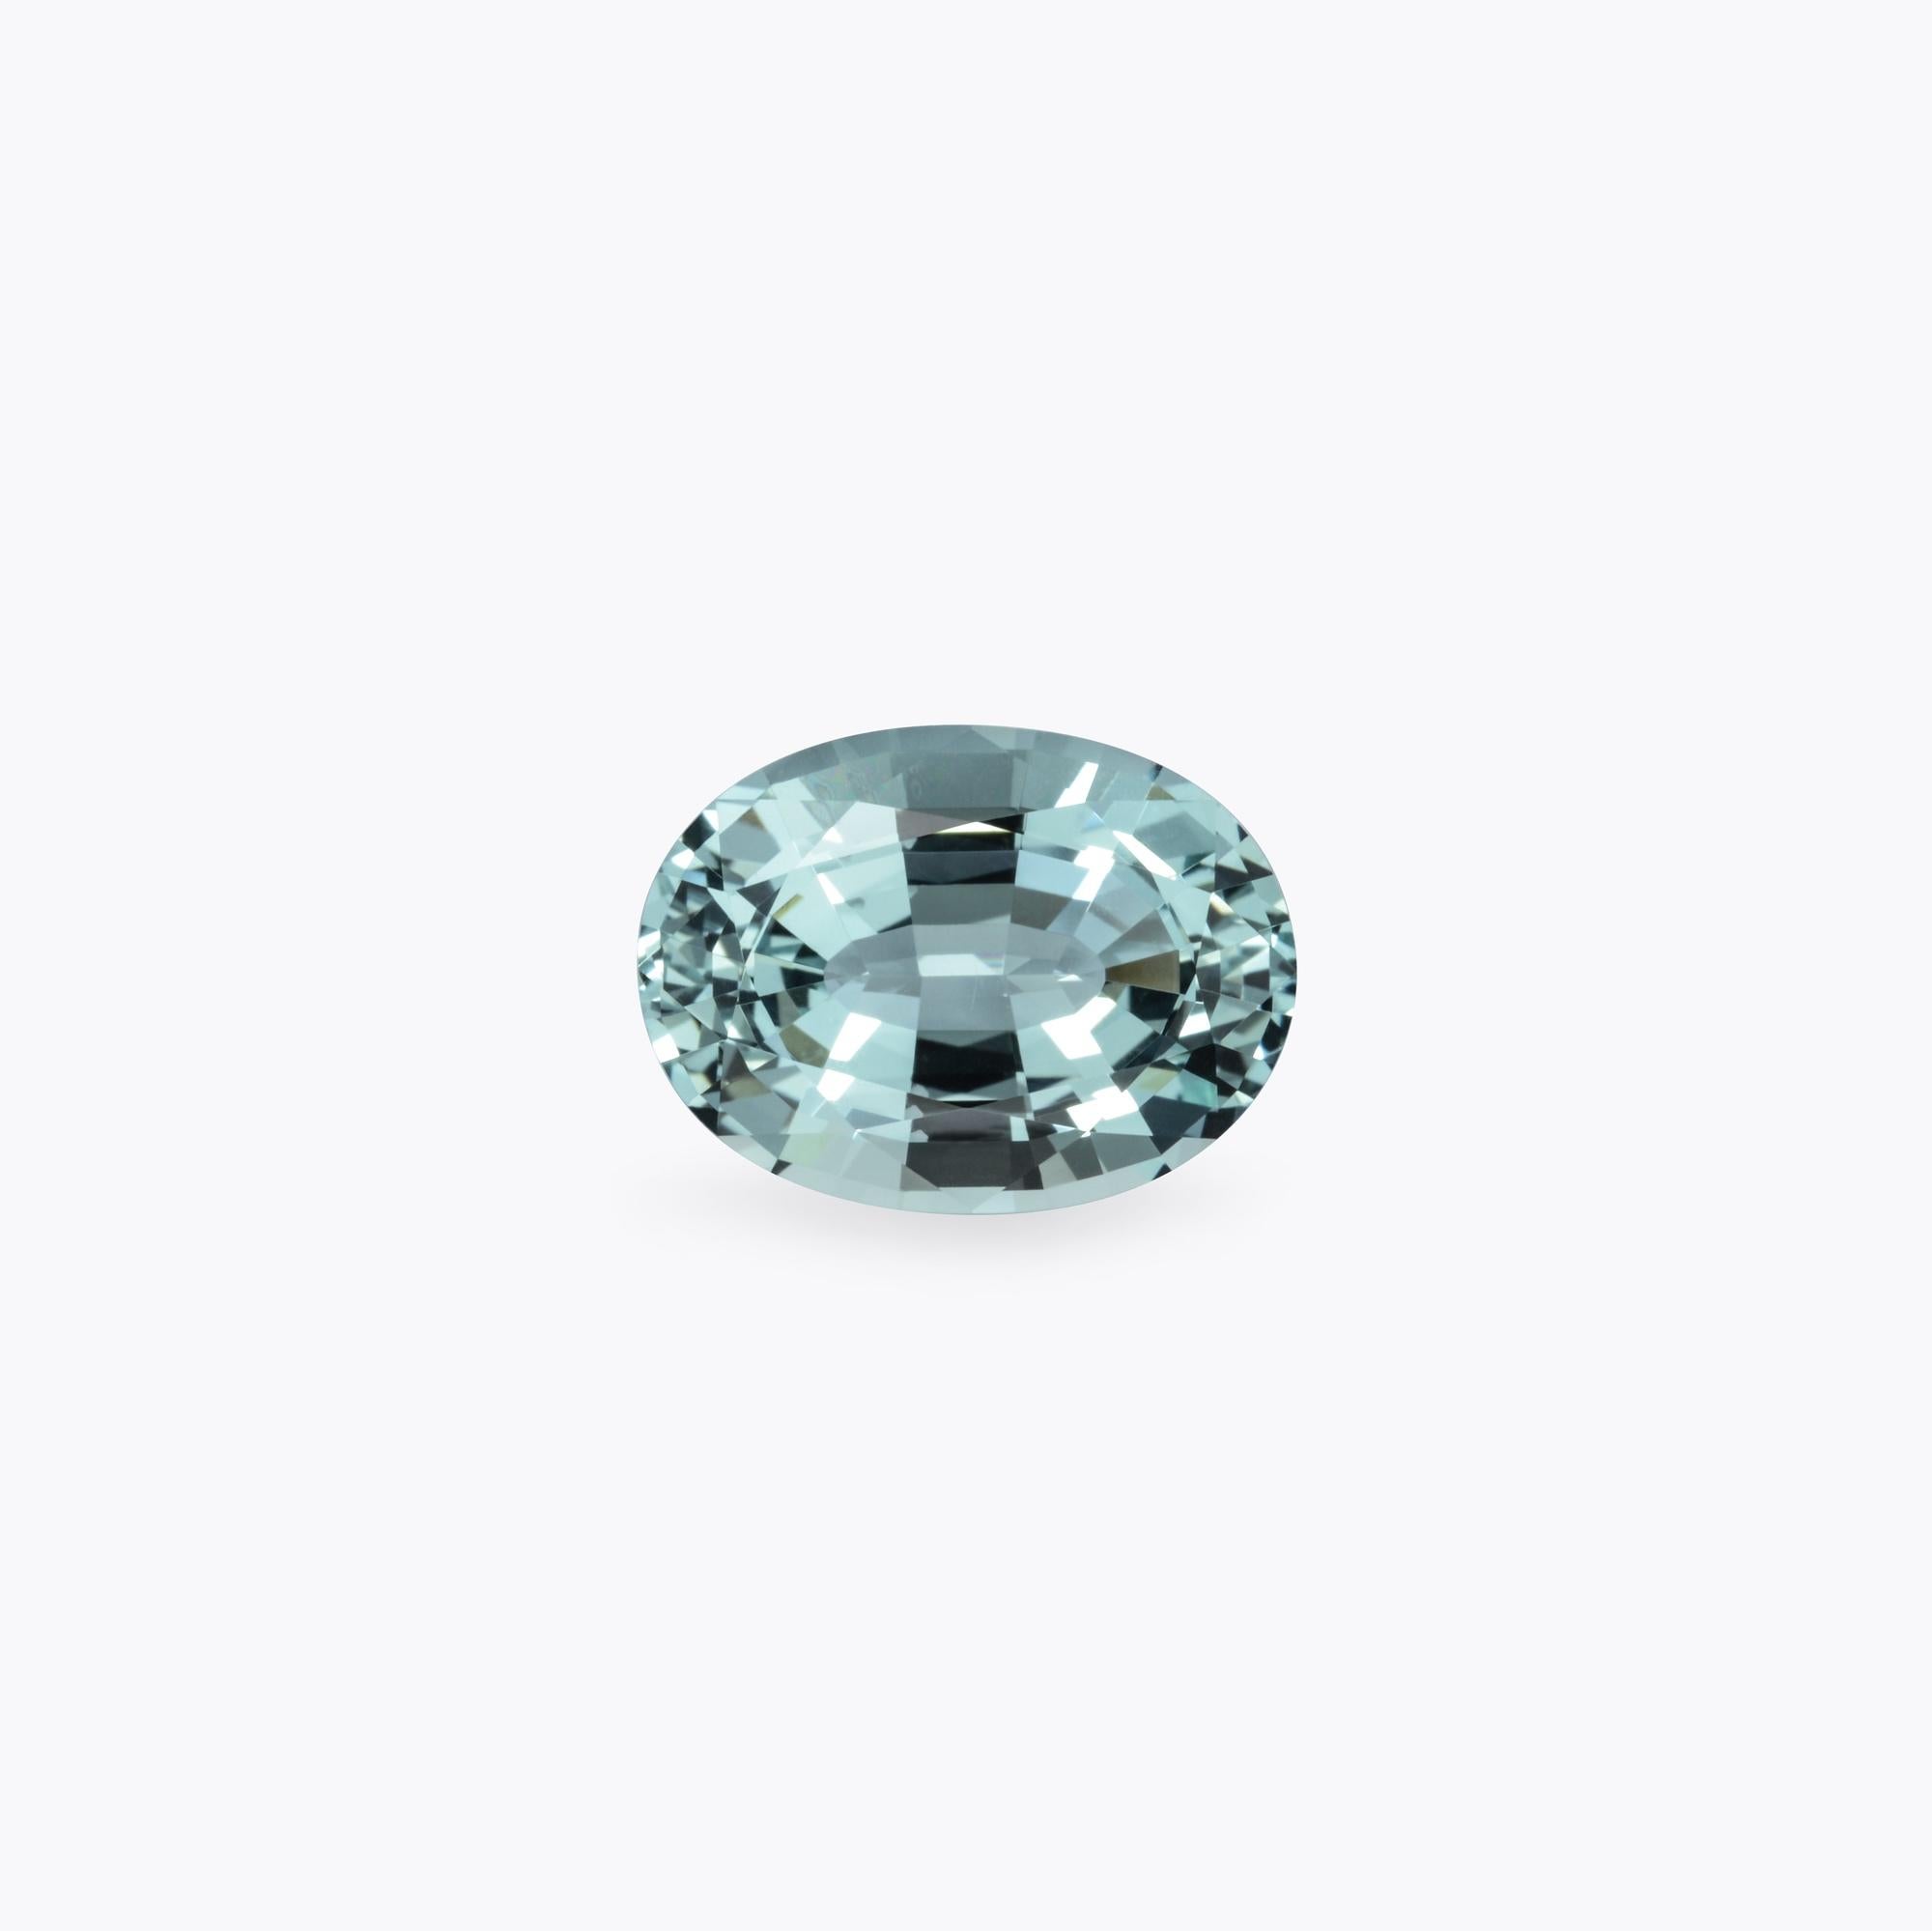 Impressive 7.86 carat Brazilian Aquamarine oval gemstone, offered loose to someone special.
Returns are accepted and paid by us within 7 days of delivery.
We offer supreme custom jewelry work upon request. Please contact us for more details.
For